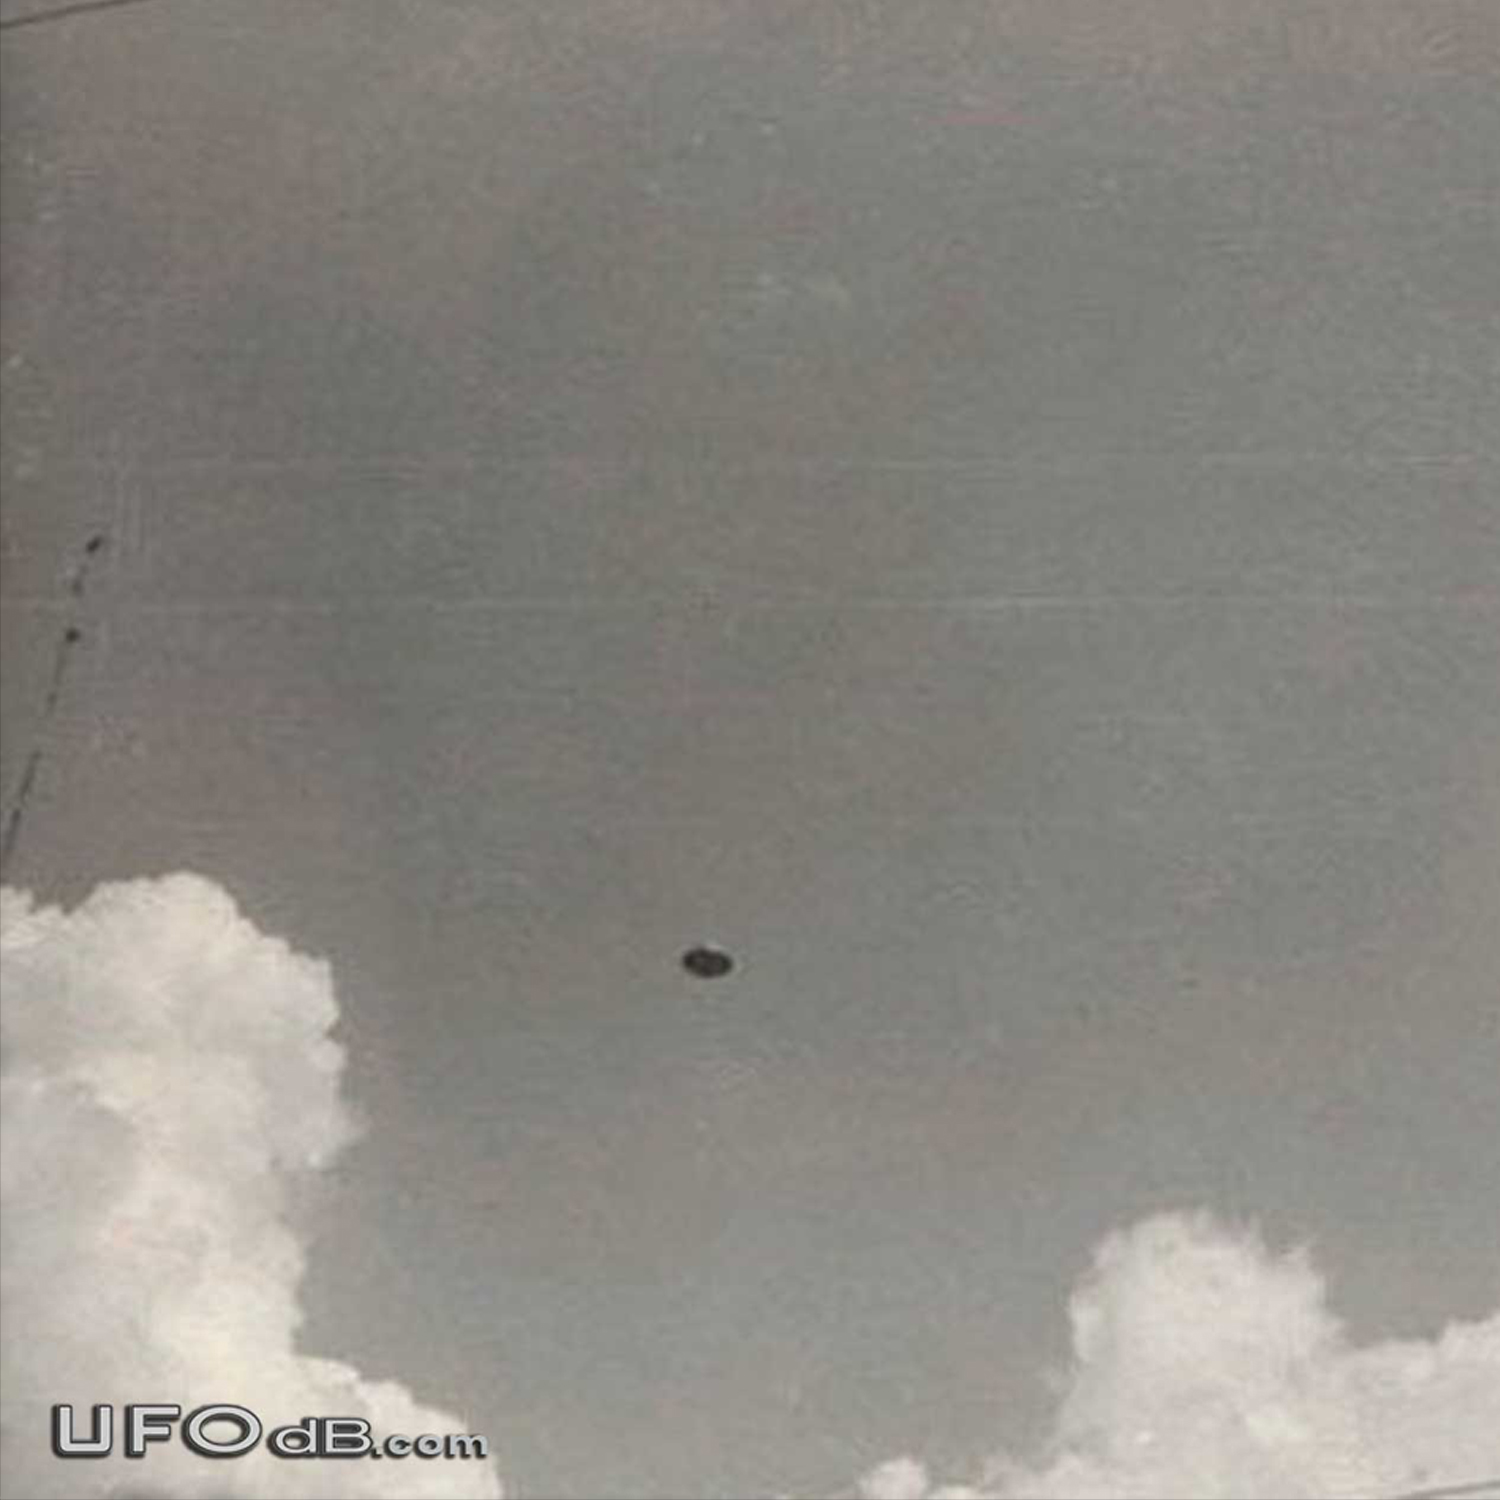 Old Grey 1956 Saucer UFO picture from Rio de Janeiro Brazil UFO Picture #370-2